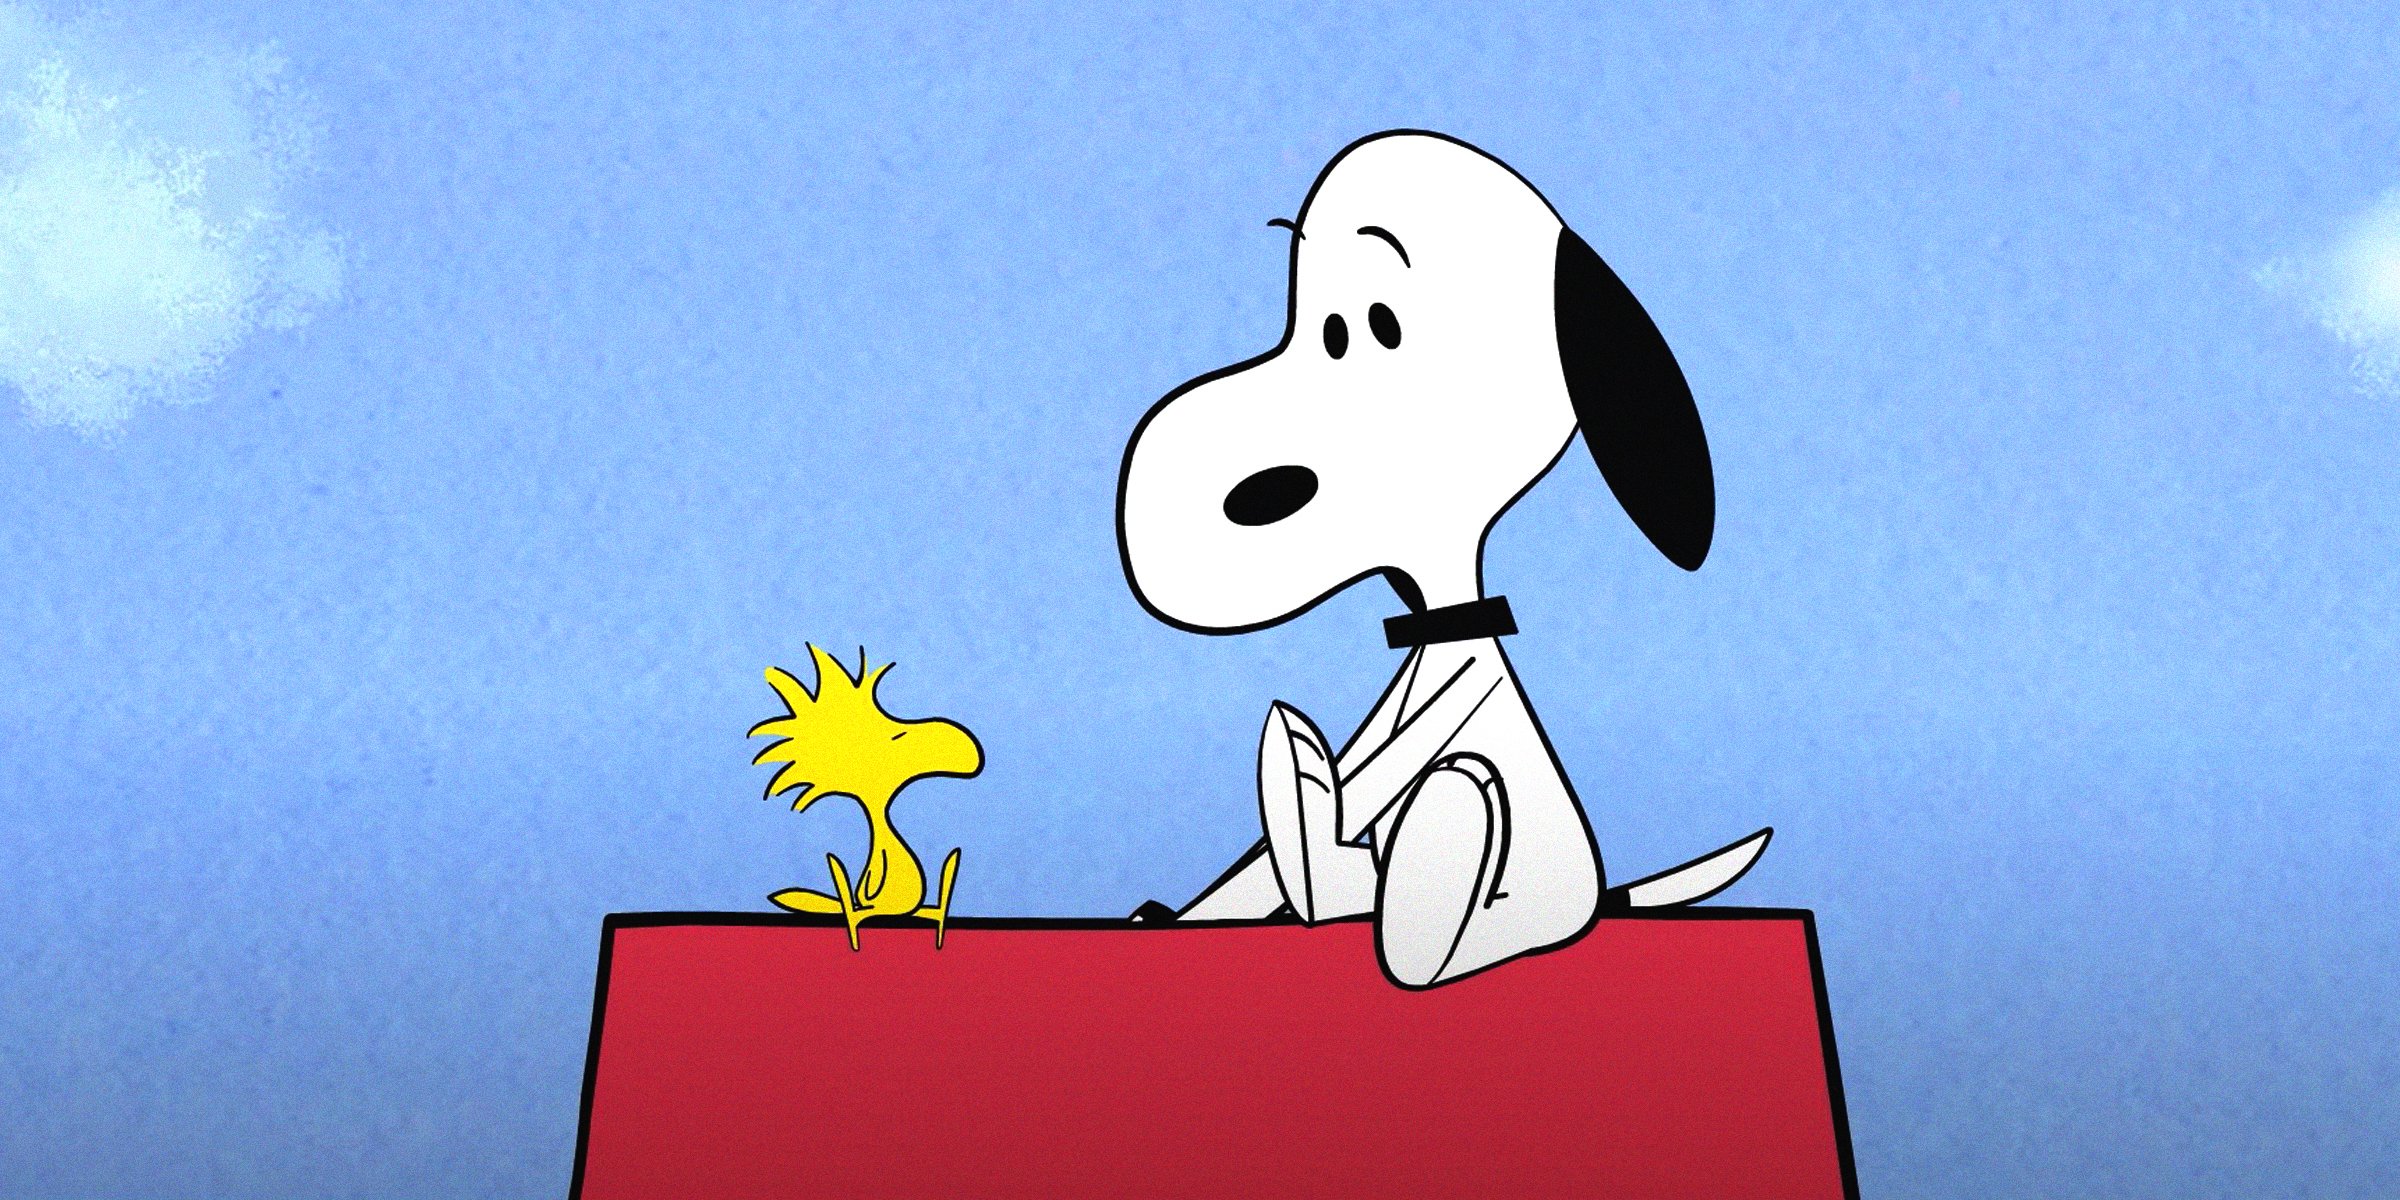 youtube.com/Snoopy |  Snoopy and Woodstock sitting on top of his dog house together